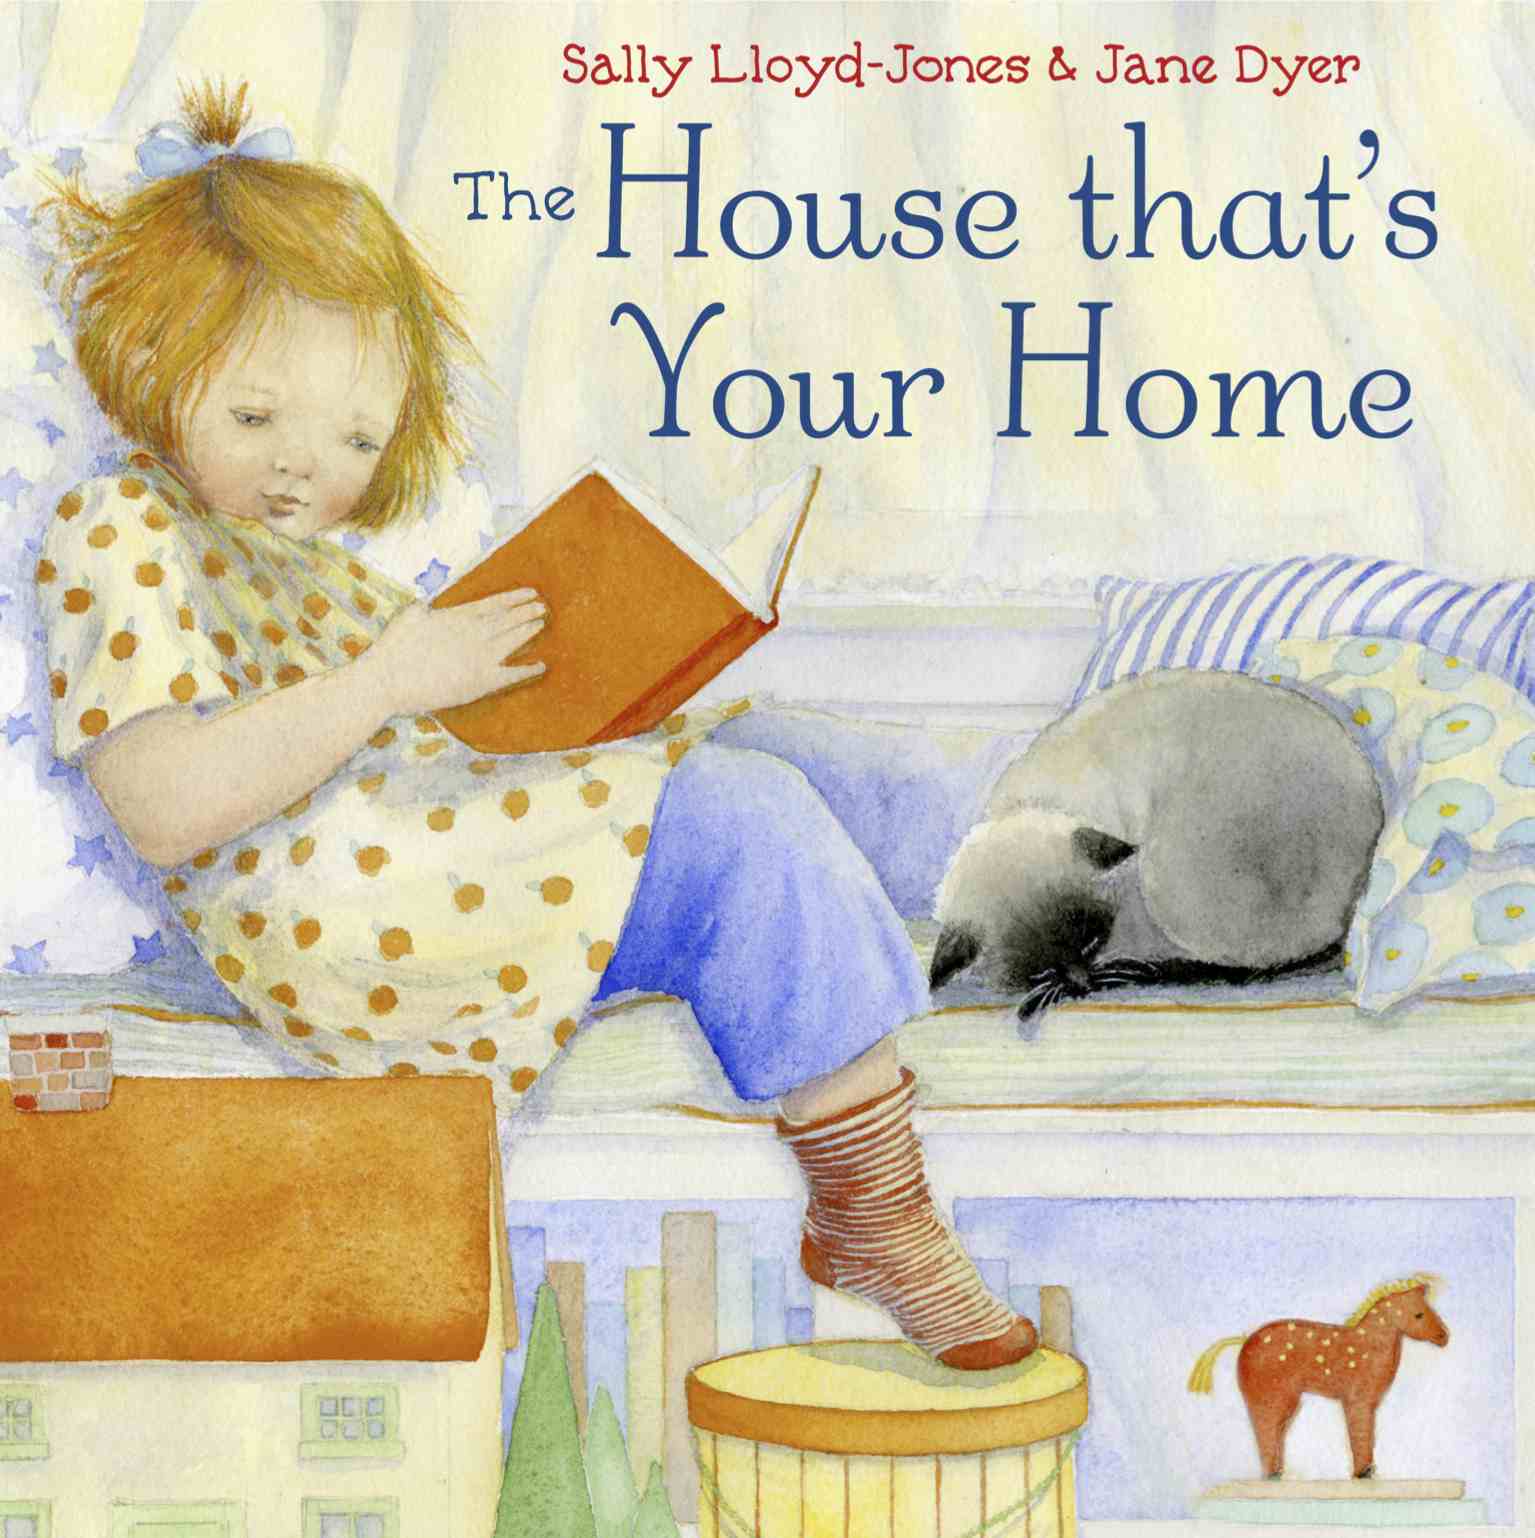 HouseThat'sYourHome